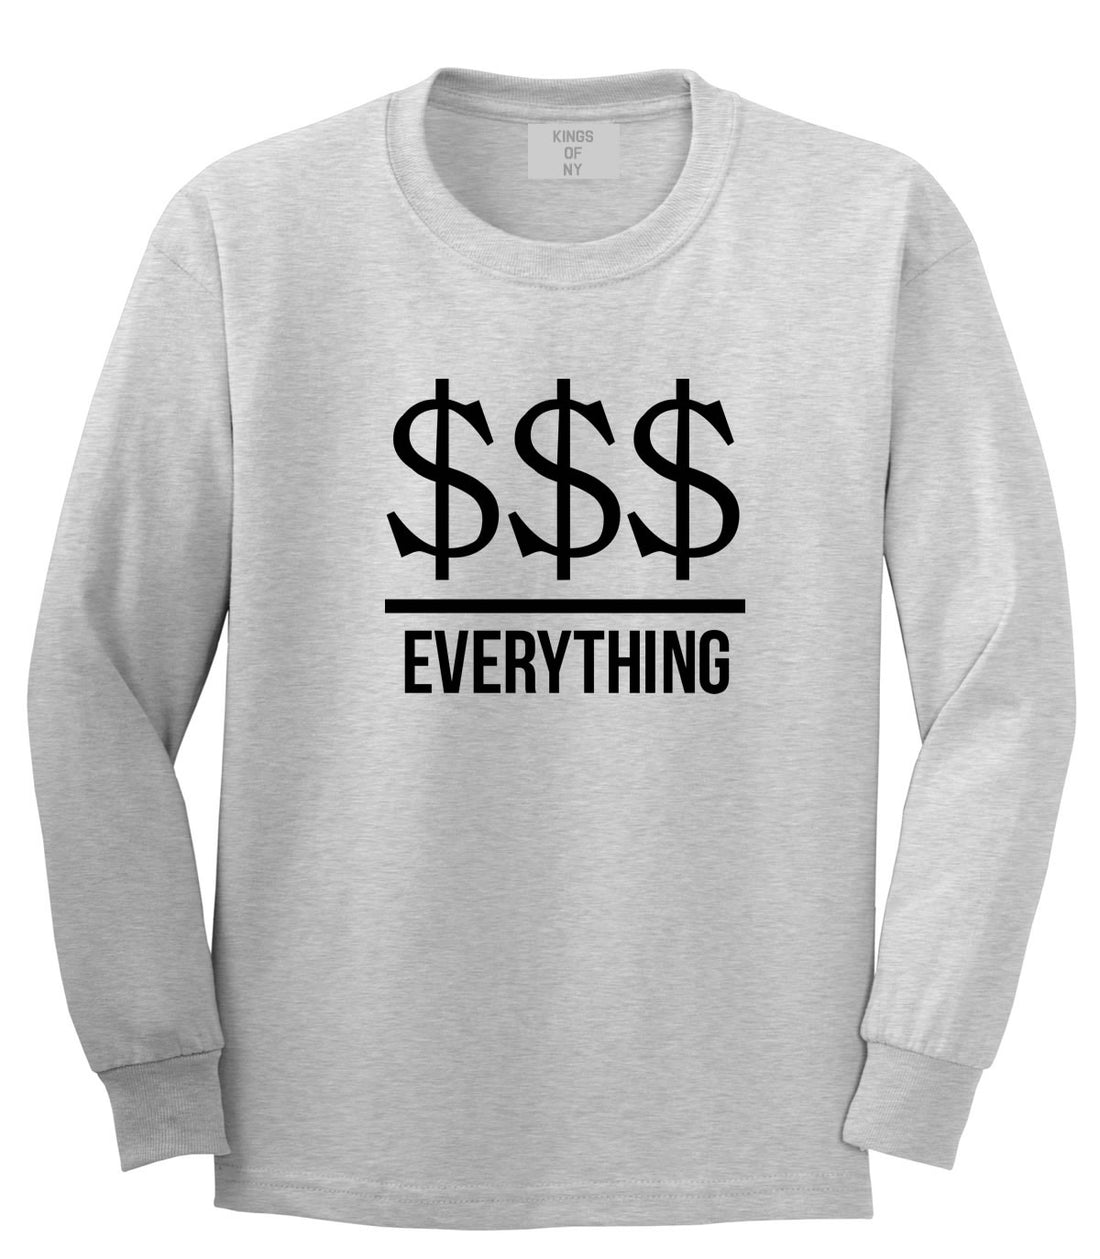 Kings Of NY Money Over Everything Long Sleeve T-Shirt in Grey